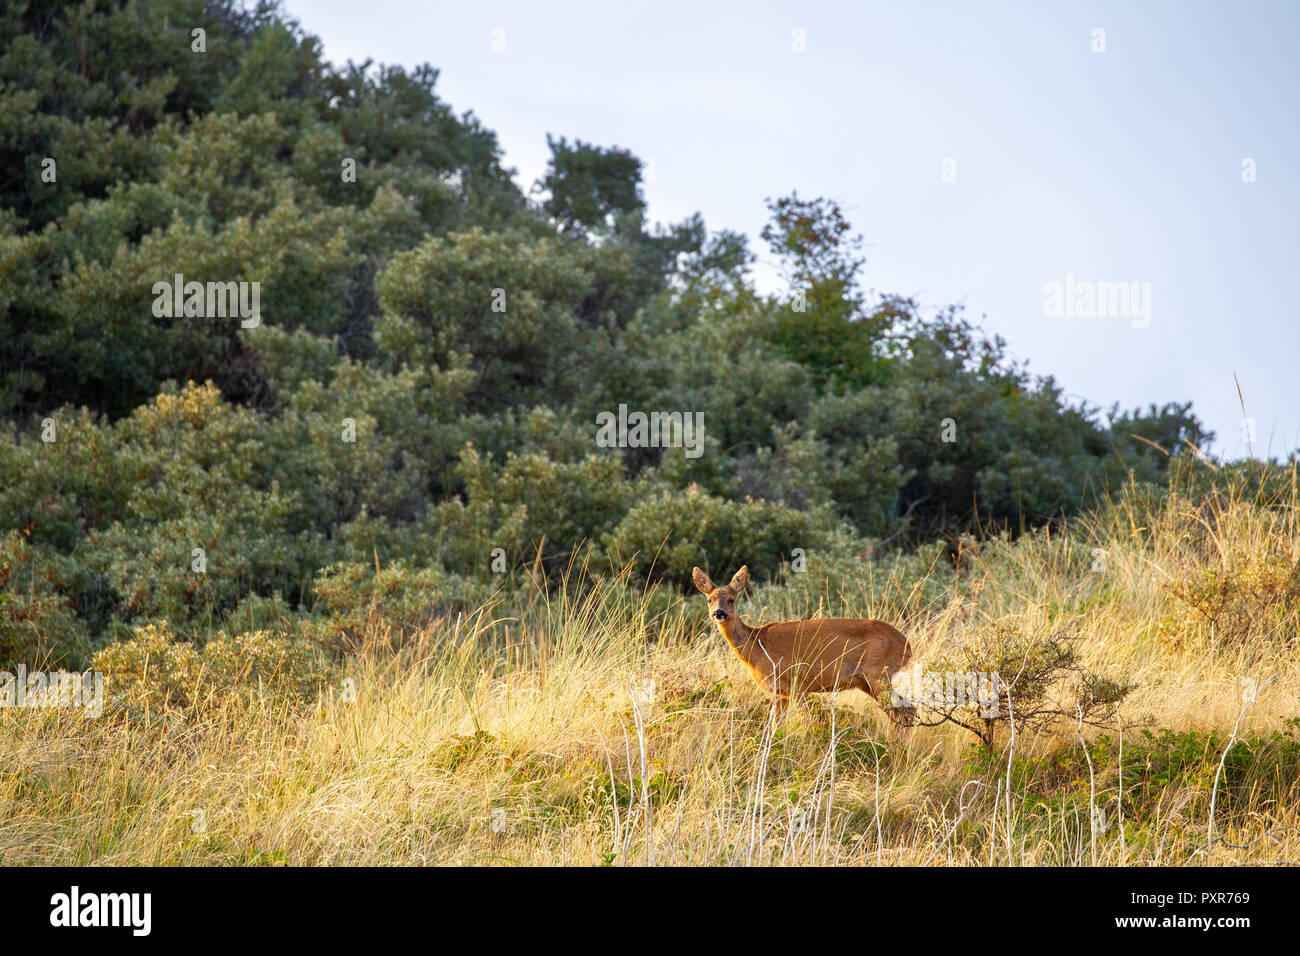 European roe deer (Capreolus capreolus) in the dunes on the East Frisian Island Juist in the North Sea, Germany. Stock Photo